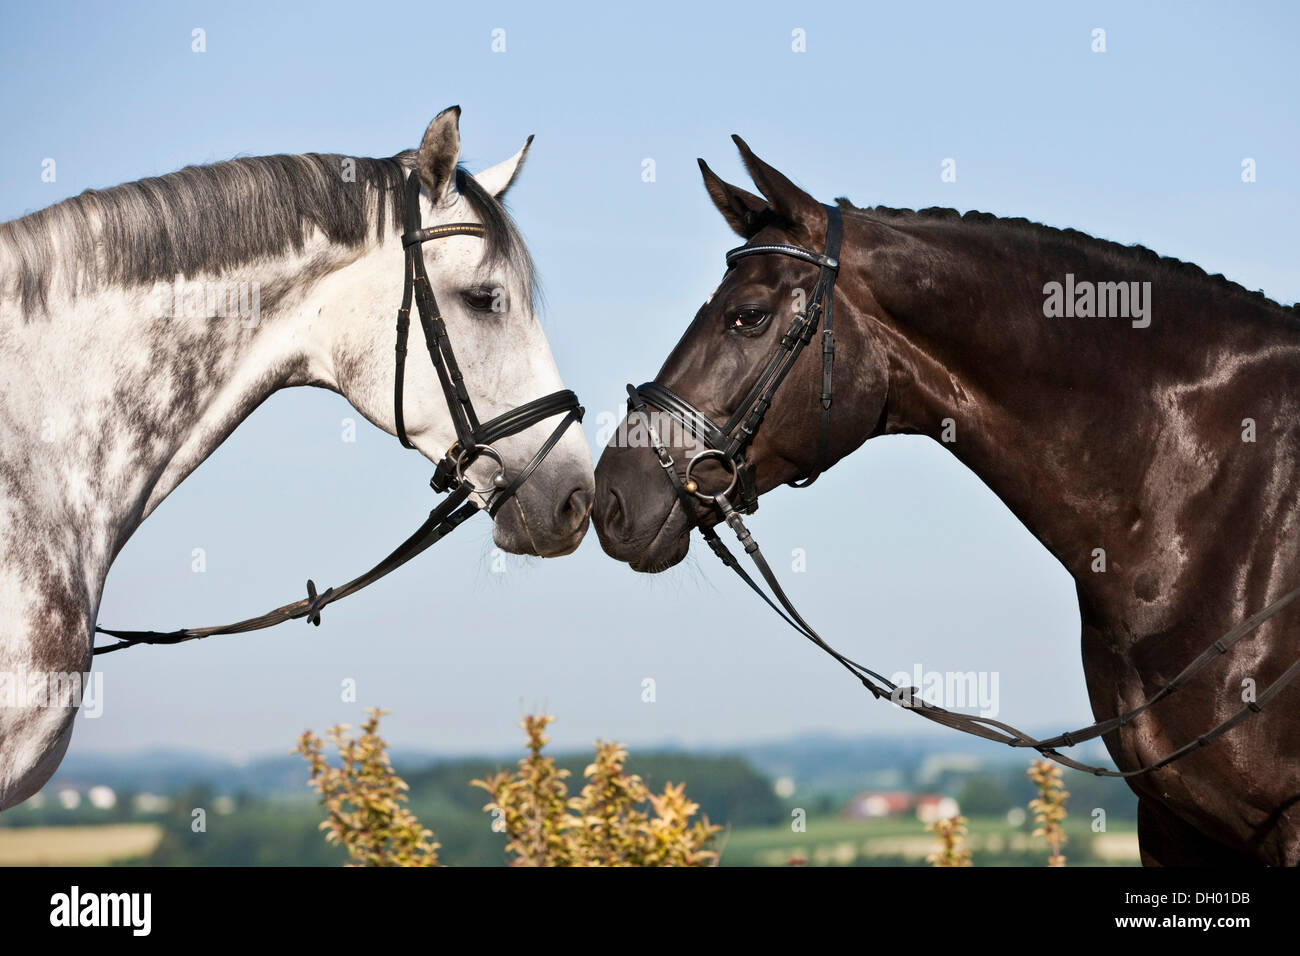 Bridled Hanoverians, grey horse and black horse, nuzzling each other, Austria Stock Photo